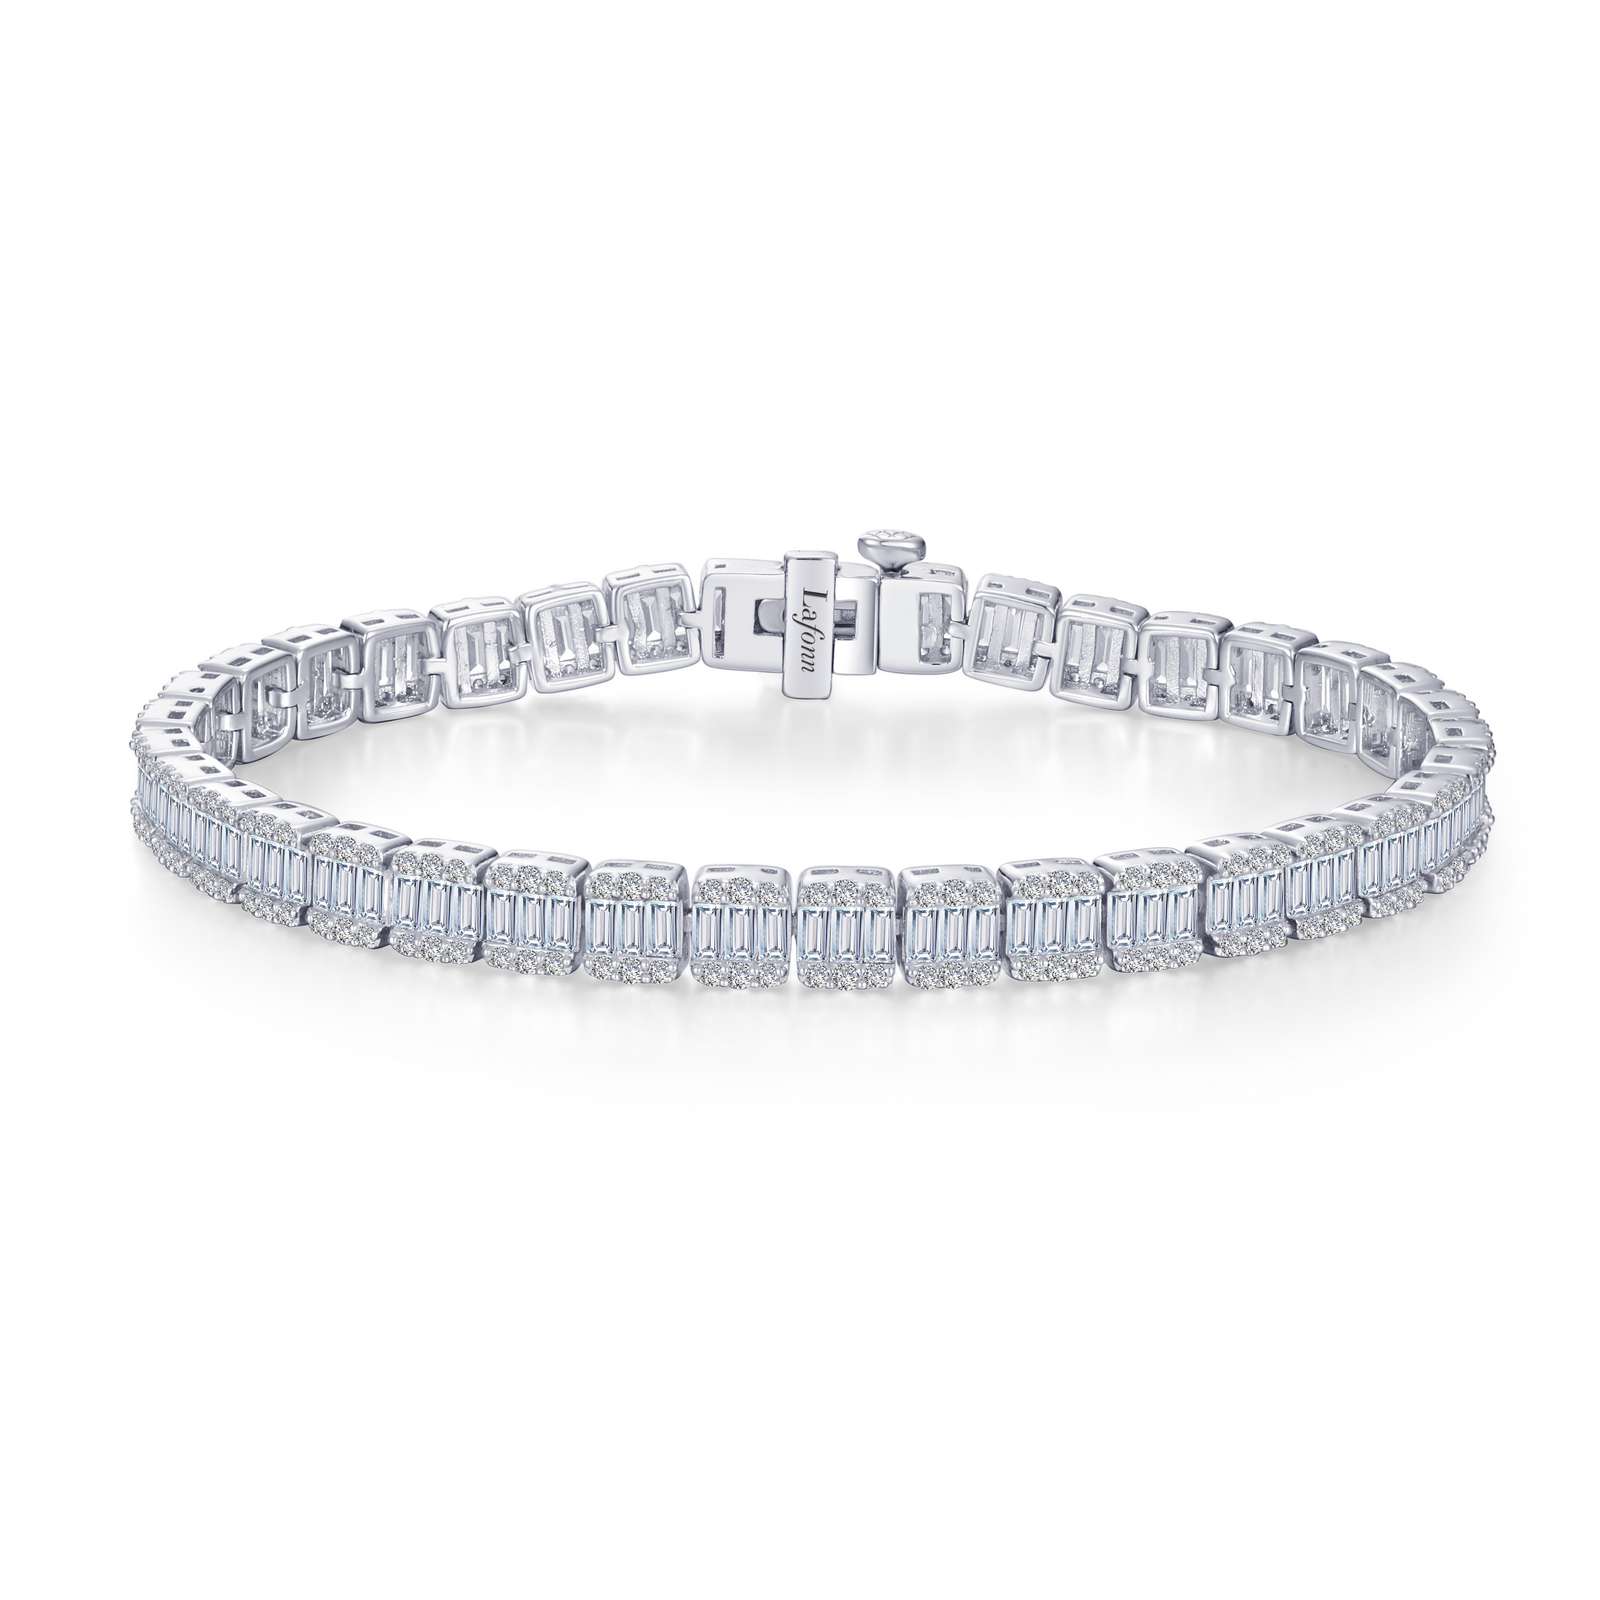 Classic Tennis Bracelet Griner Jewelry Co. Moultrie, GA